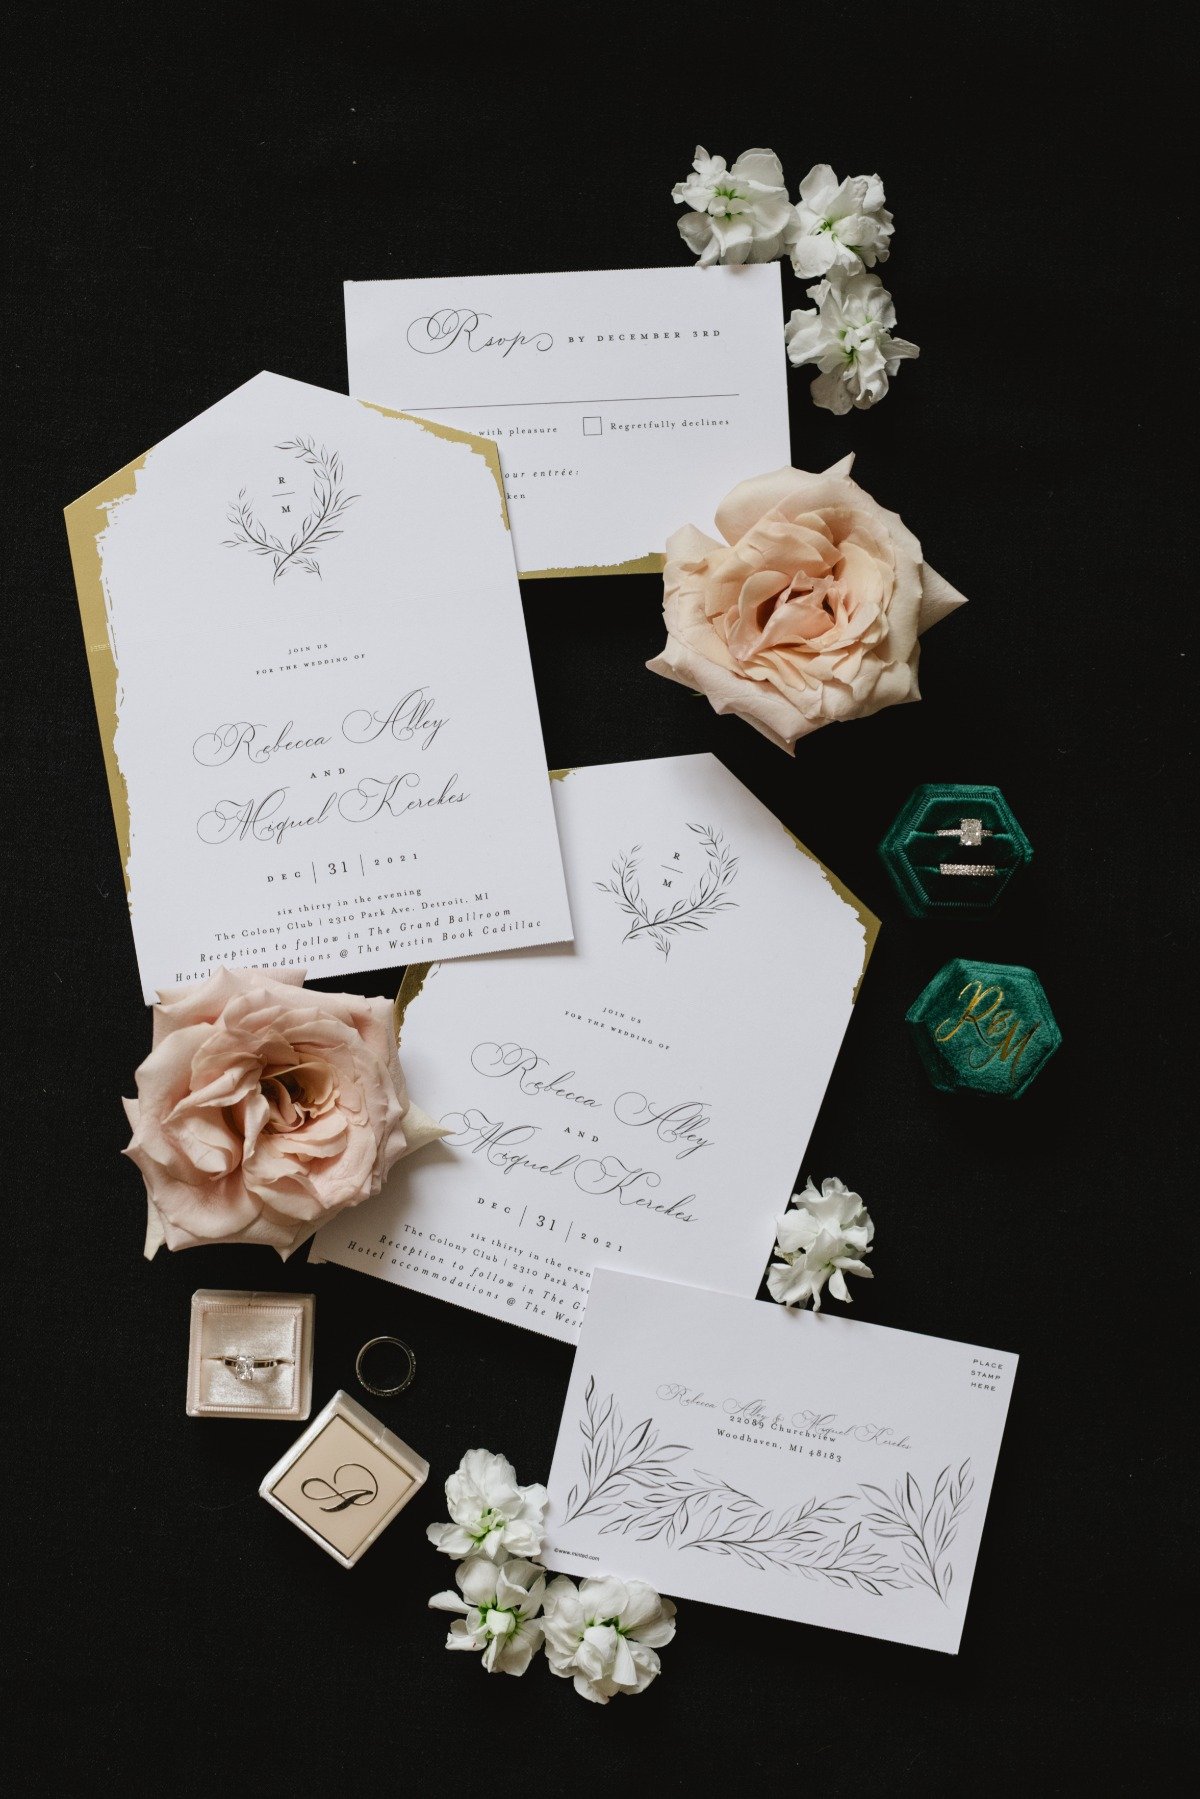 Aerial view of invitations with floral accents